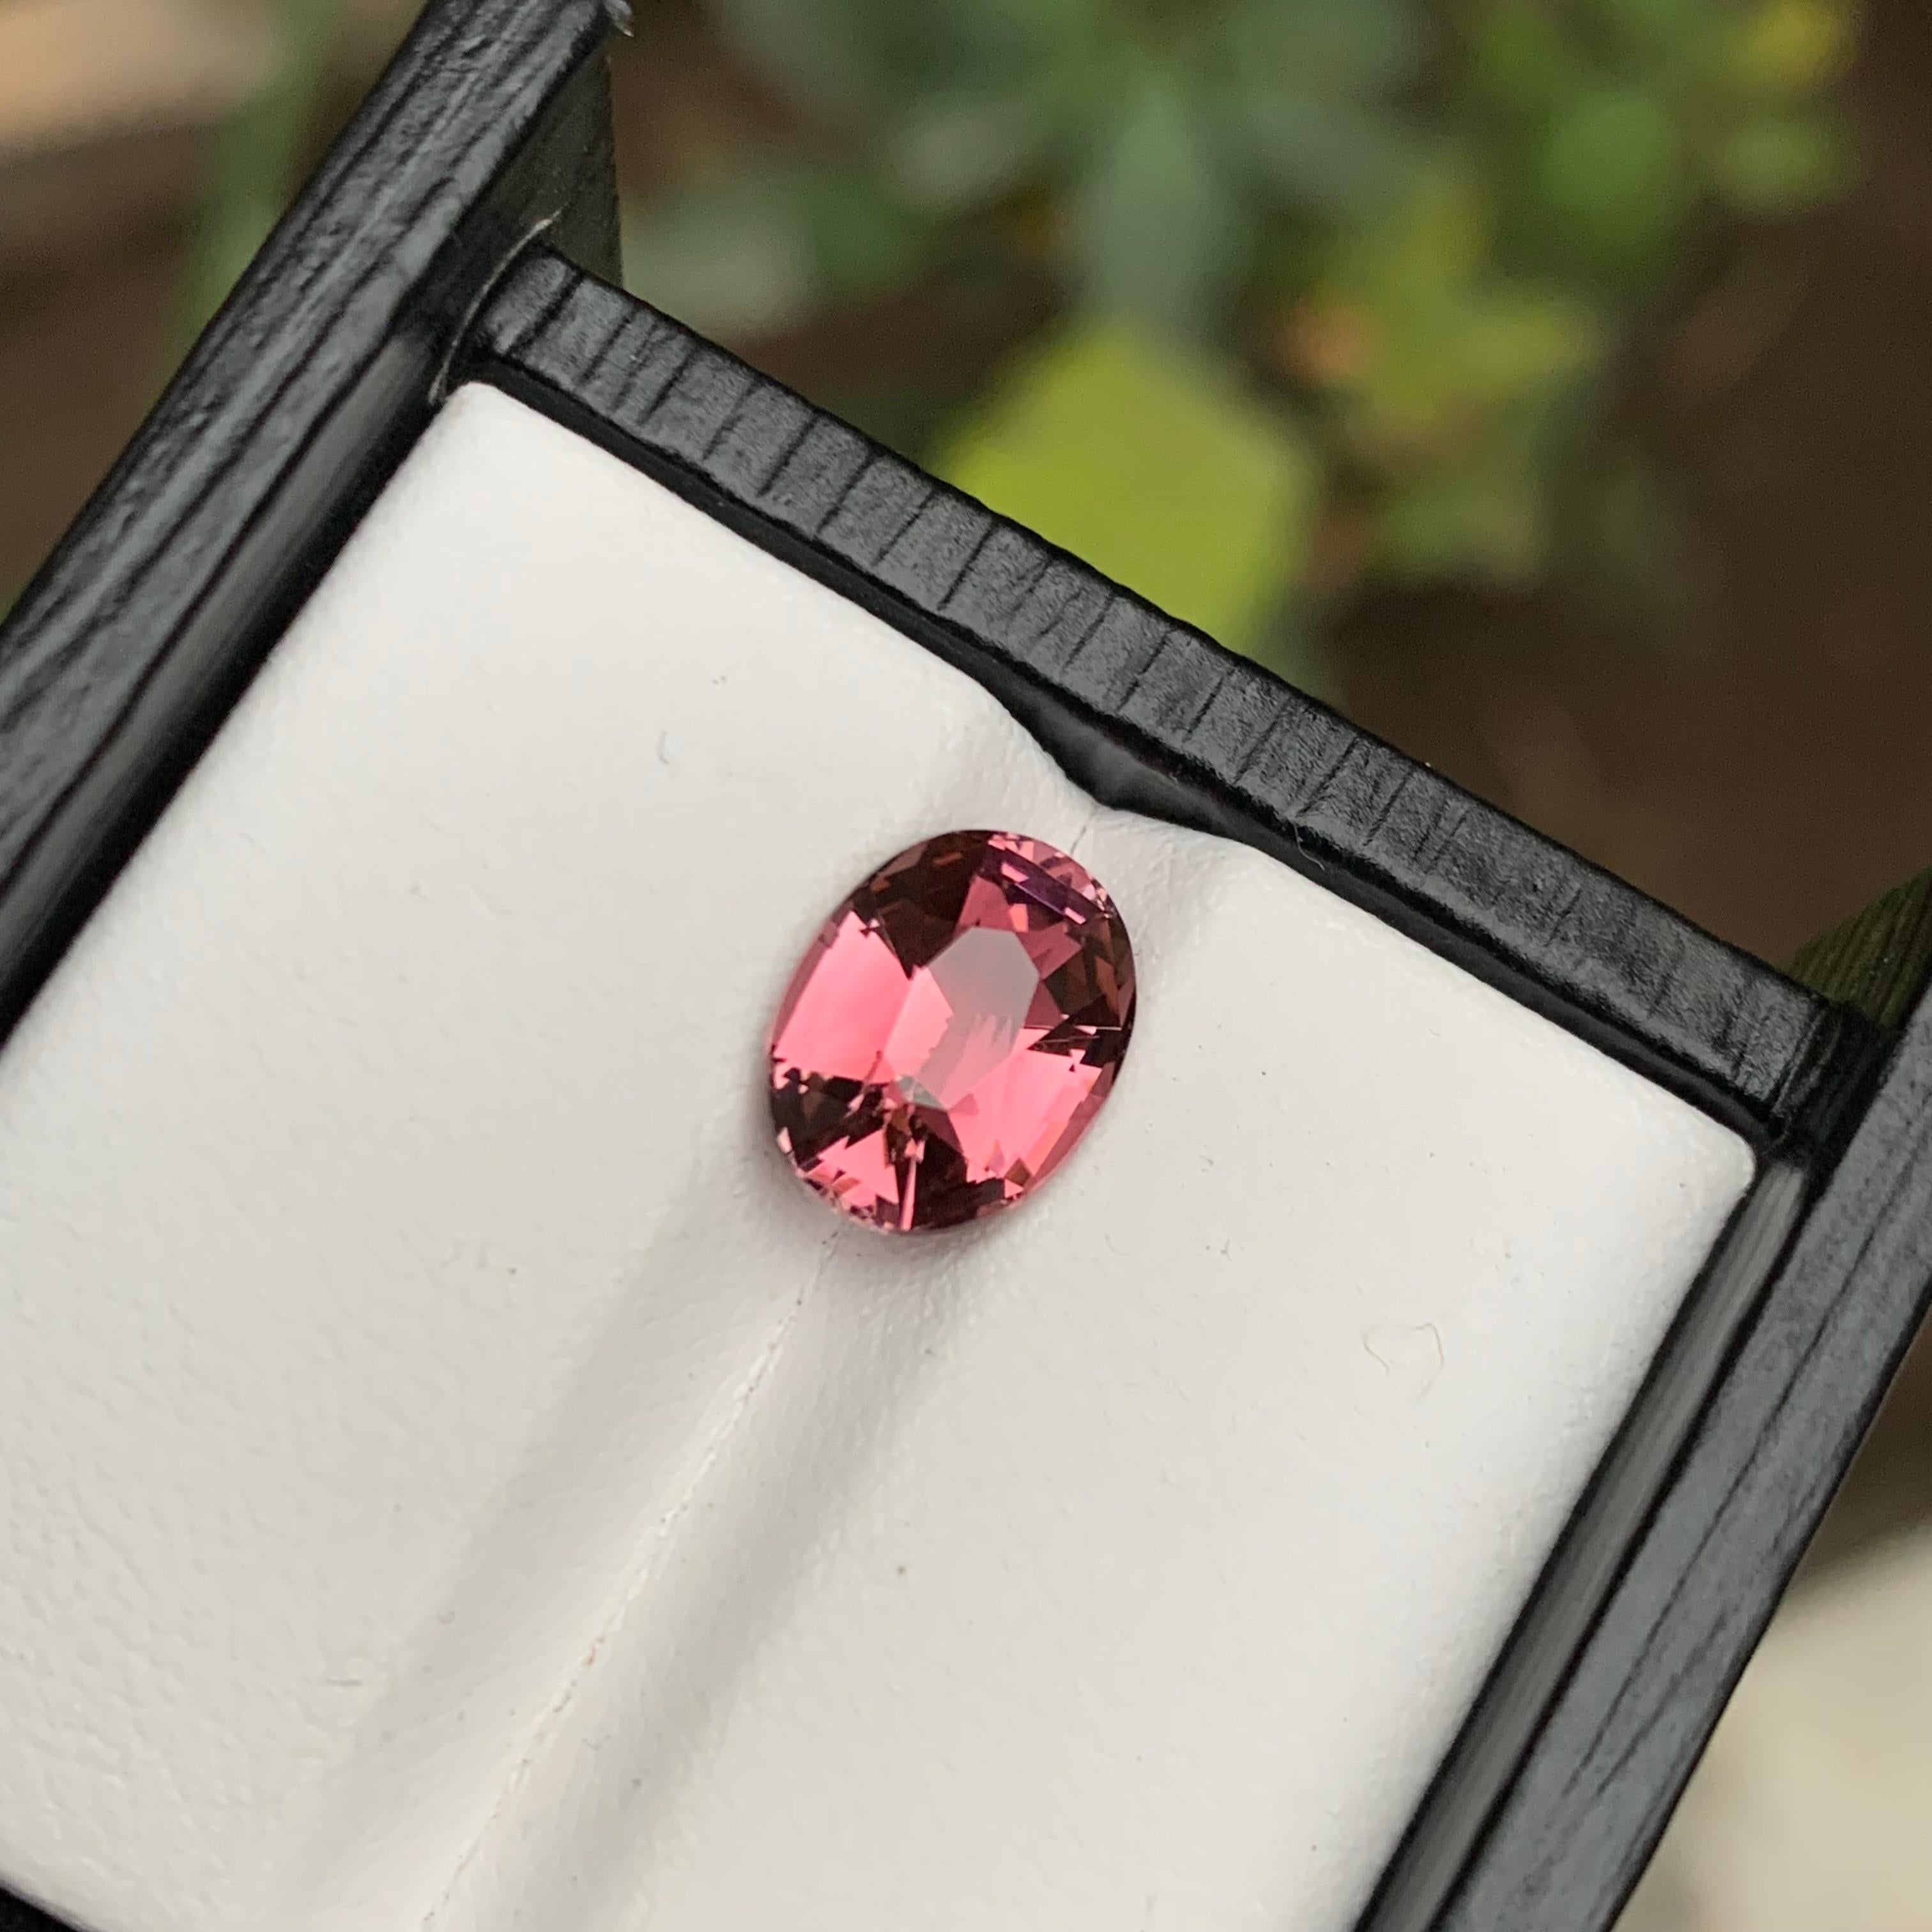 Women's or Men's Rare Pink Natural Afghan Tourmaline Loose Gemstone, 2.75 Ct-Cushion Cut for ring For Sale